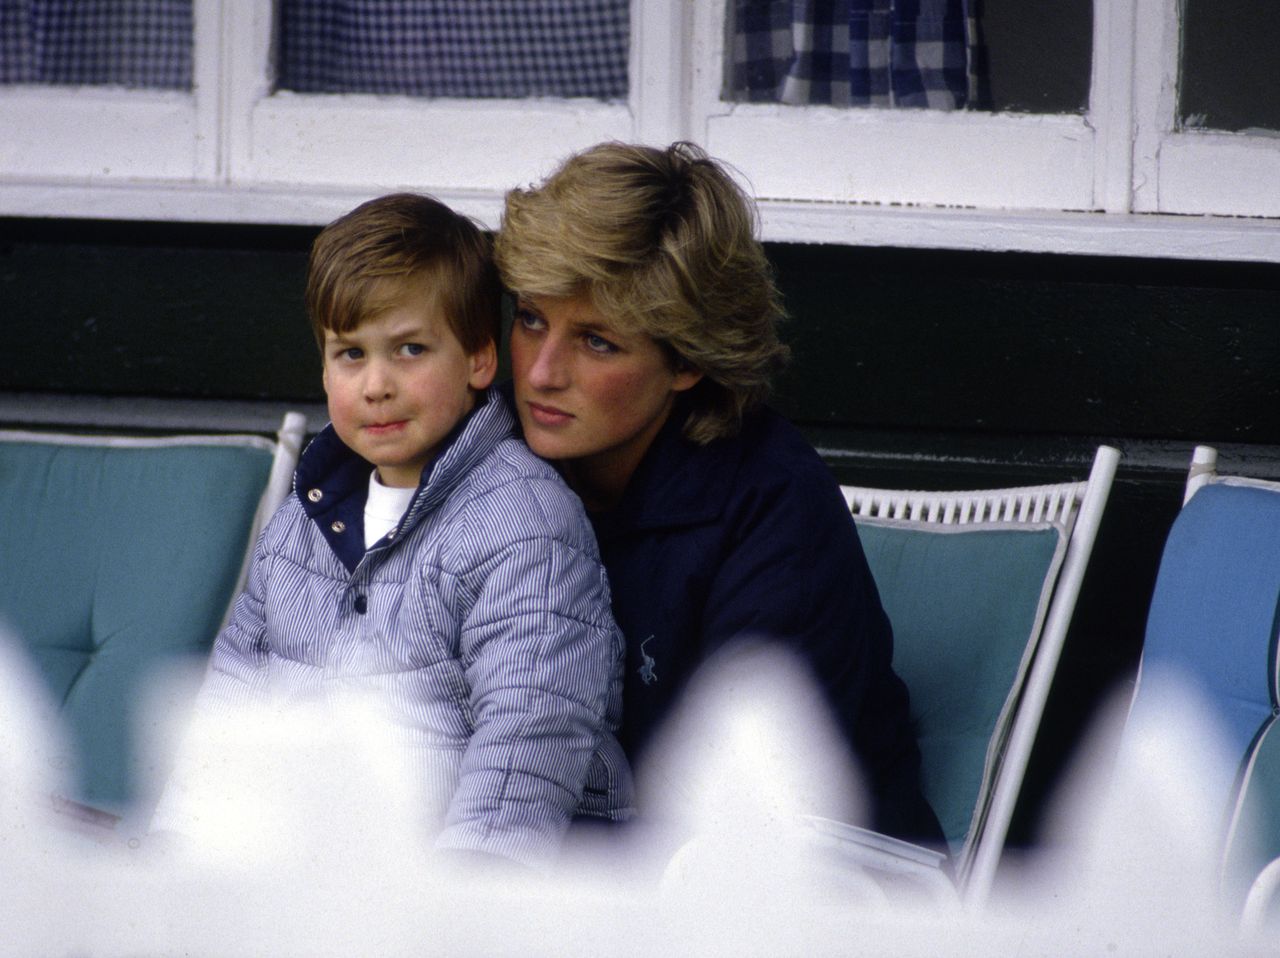 Princess Diana's final moments: Firefighter recounts tragic accident